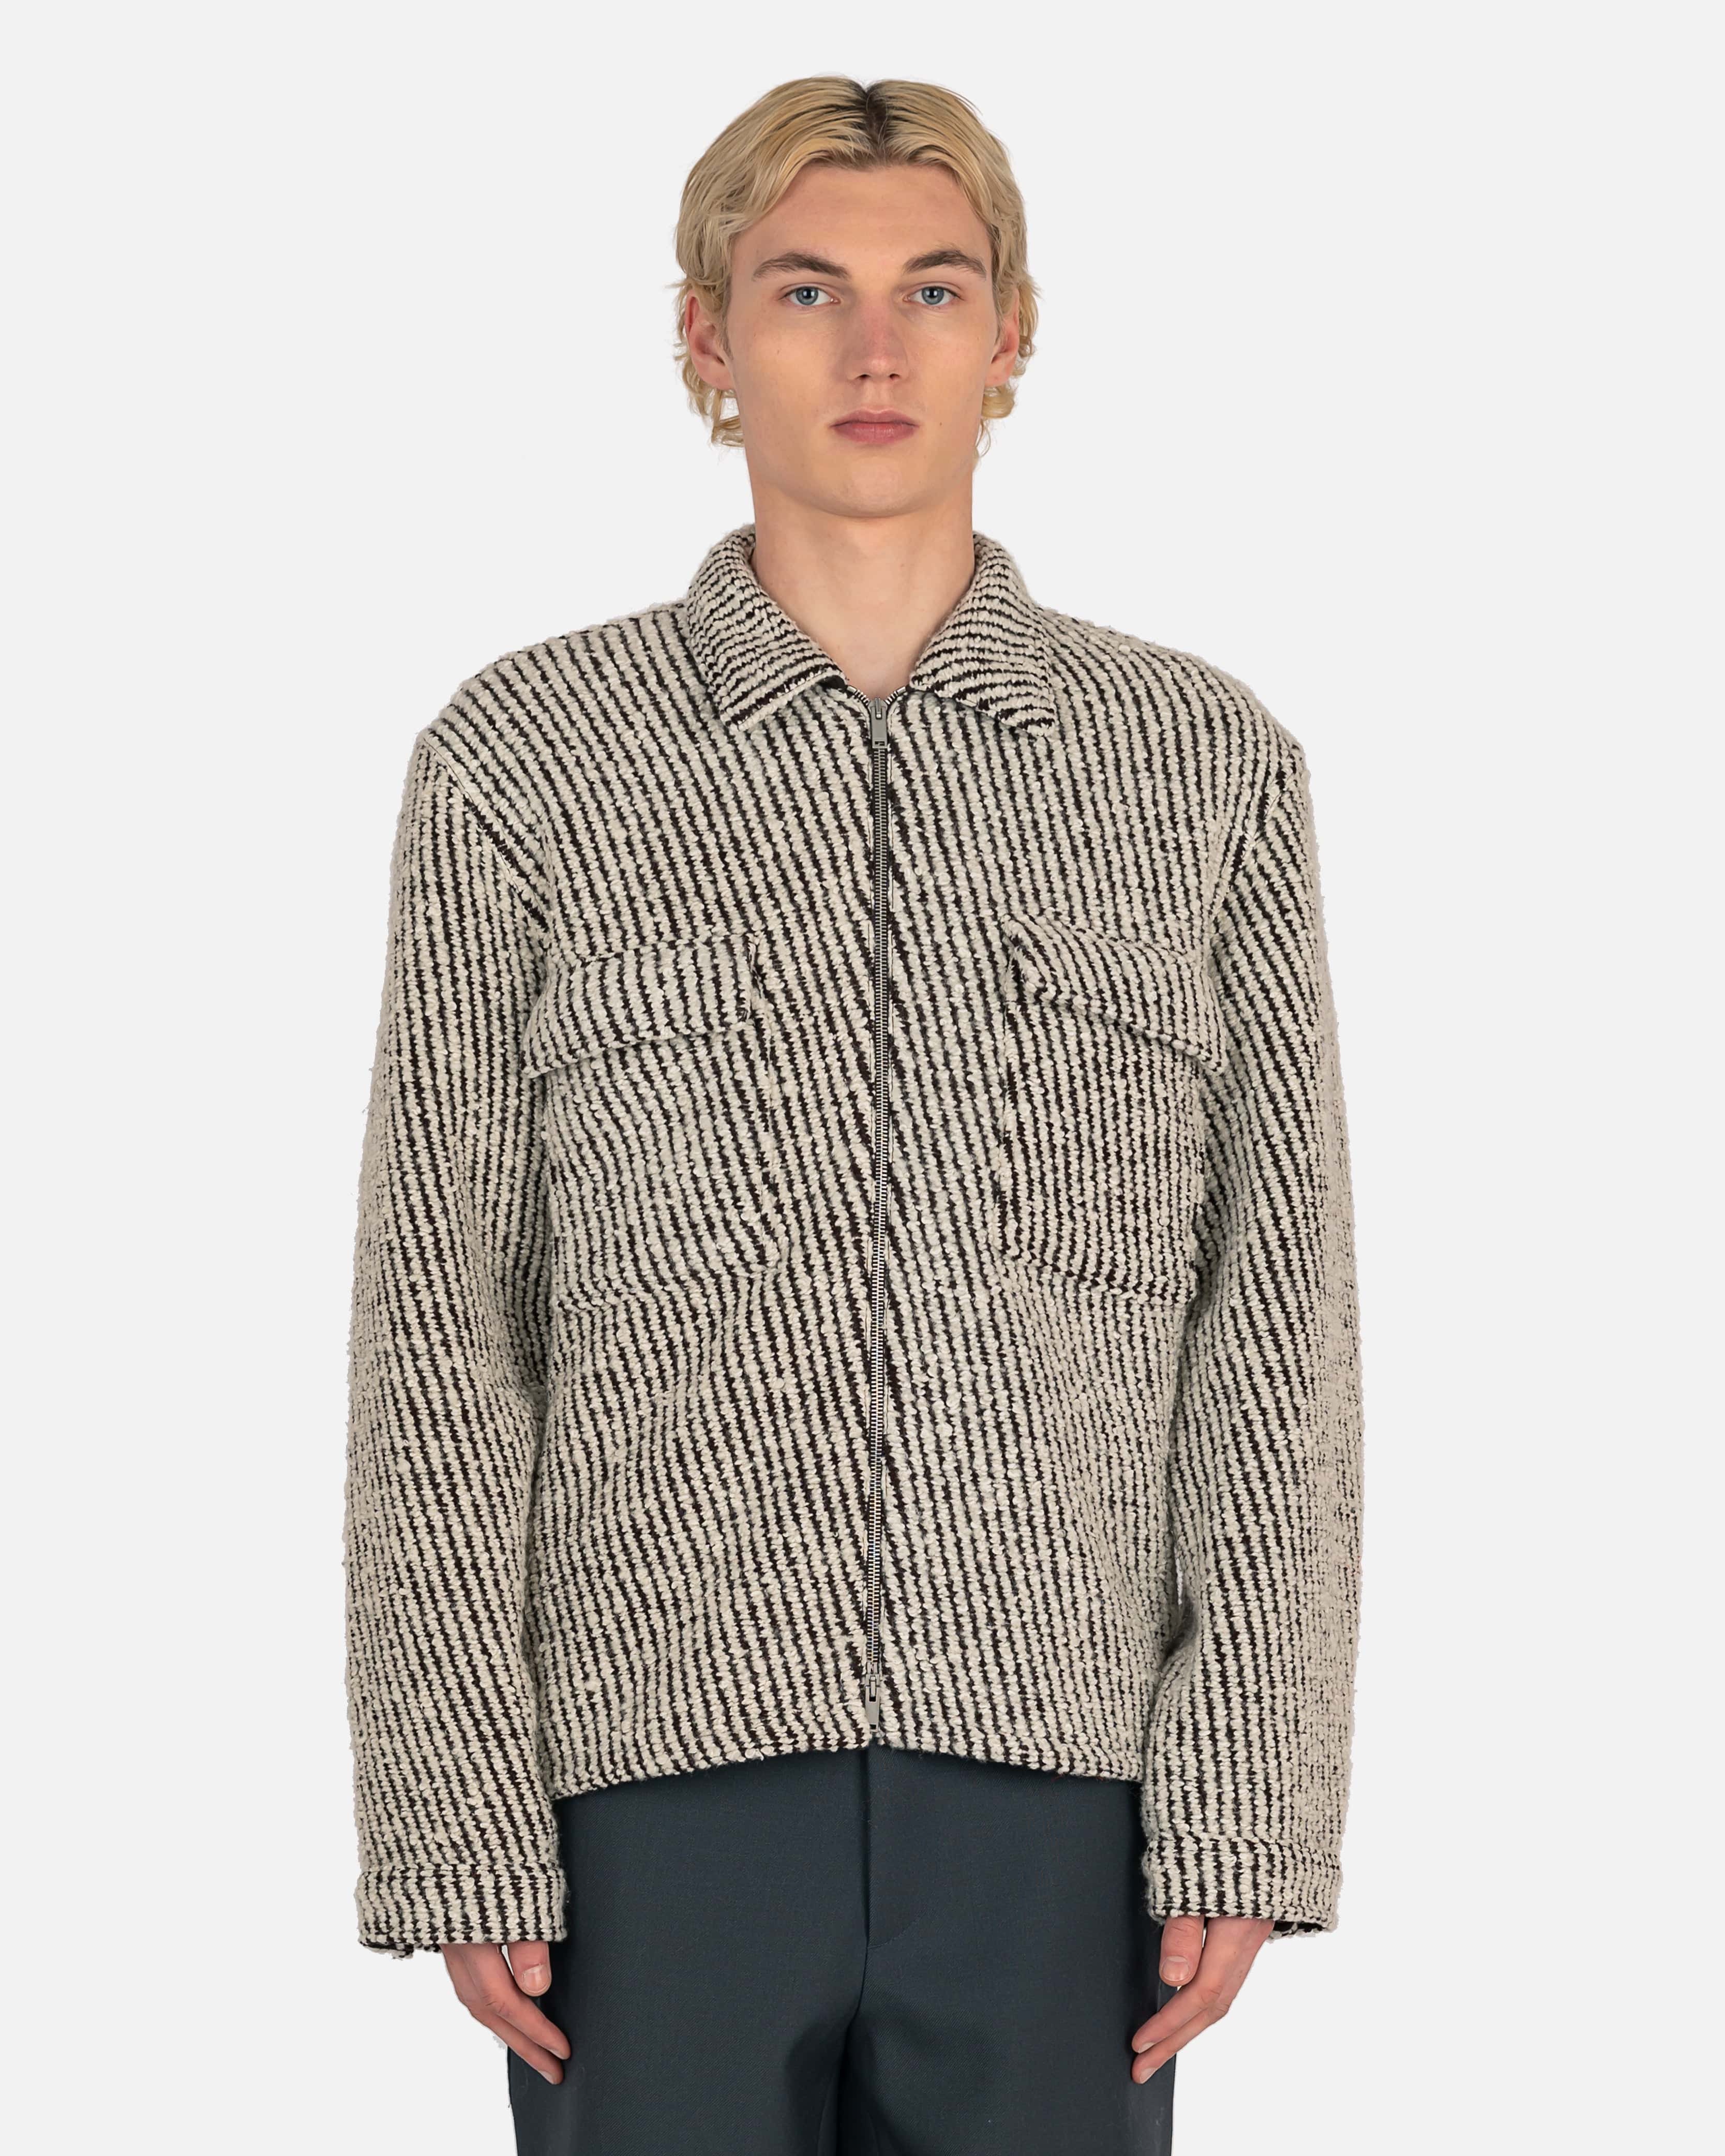 White – Open Shirt SVRN in Jacquard Knit